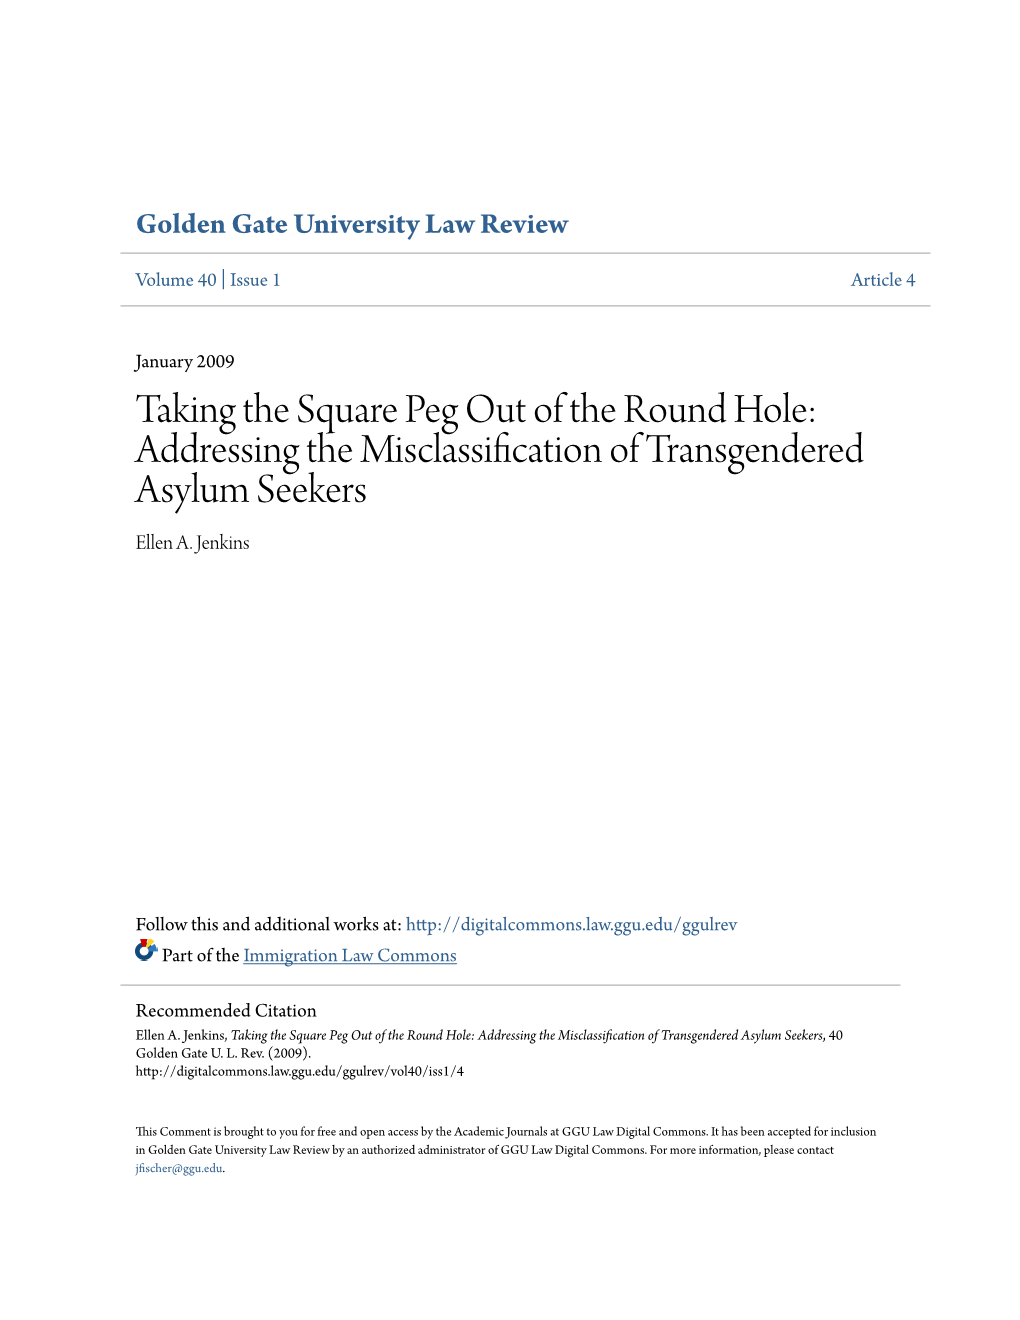 Taking the Square Peg out of the Round Hole: Addressing the Misclassification of Transgendered Asylum Seekers Ellen A